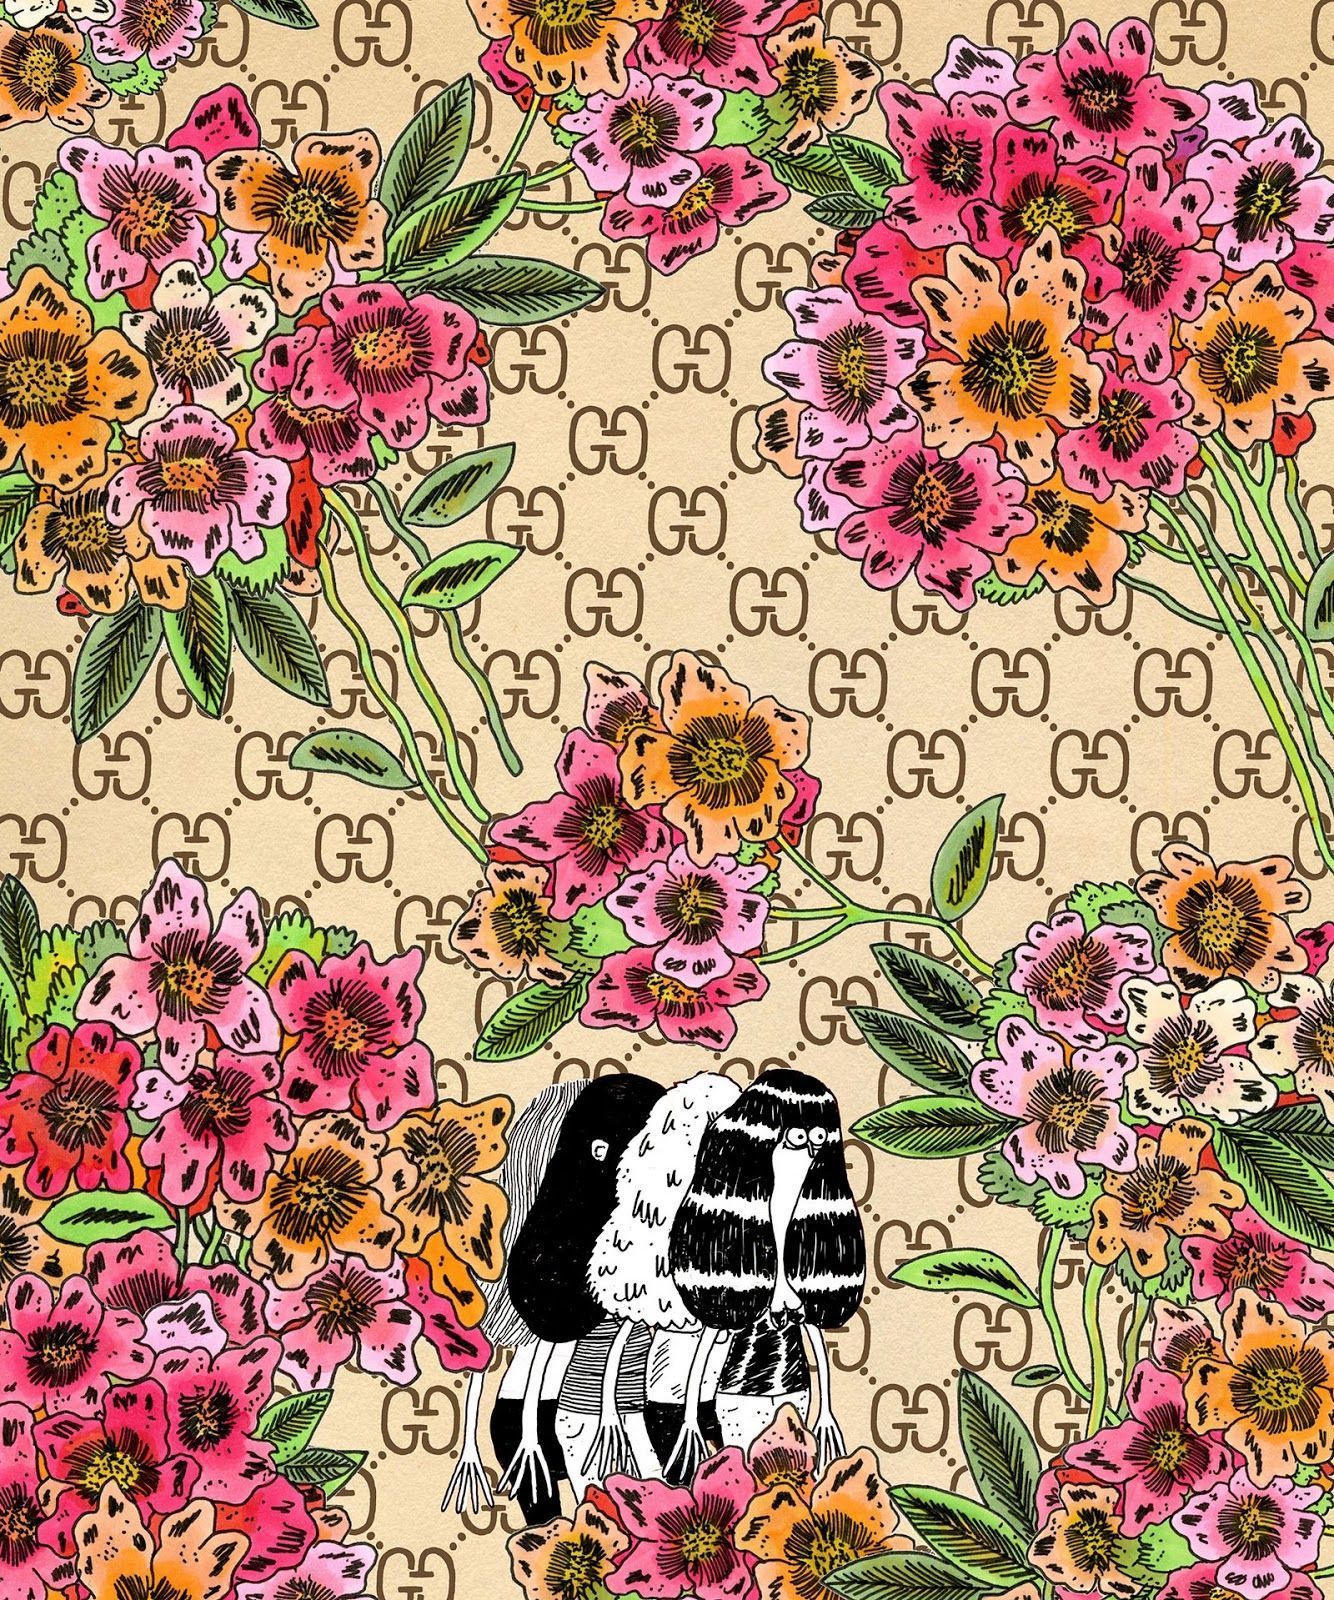 Gucci Flora Phone Wallpapers on WallpaperDog